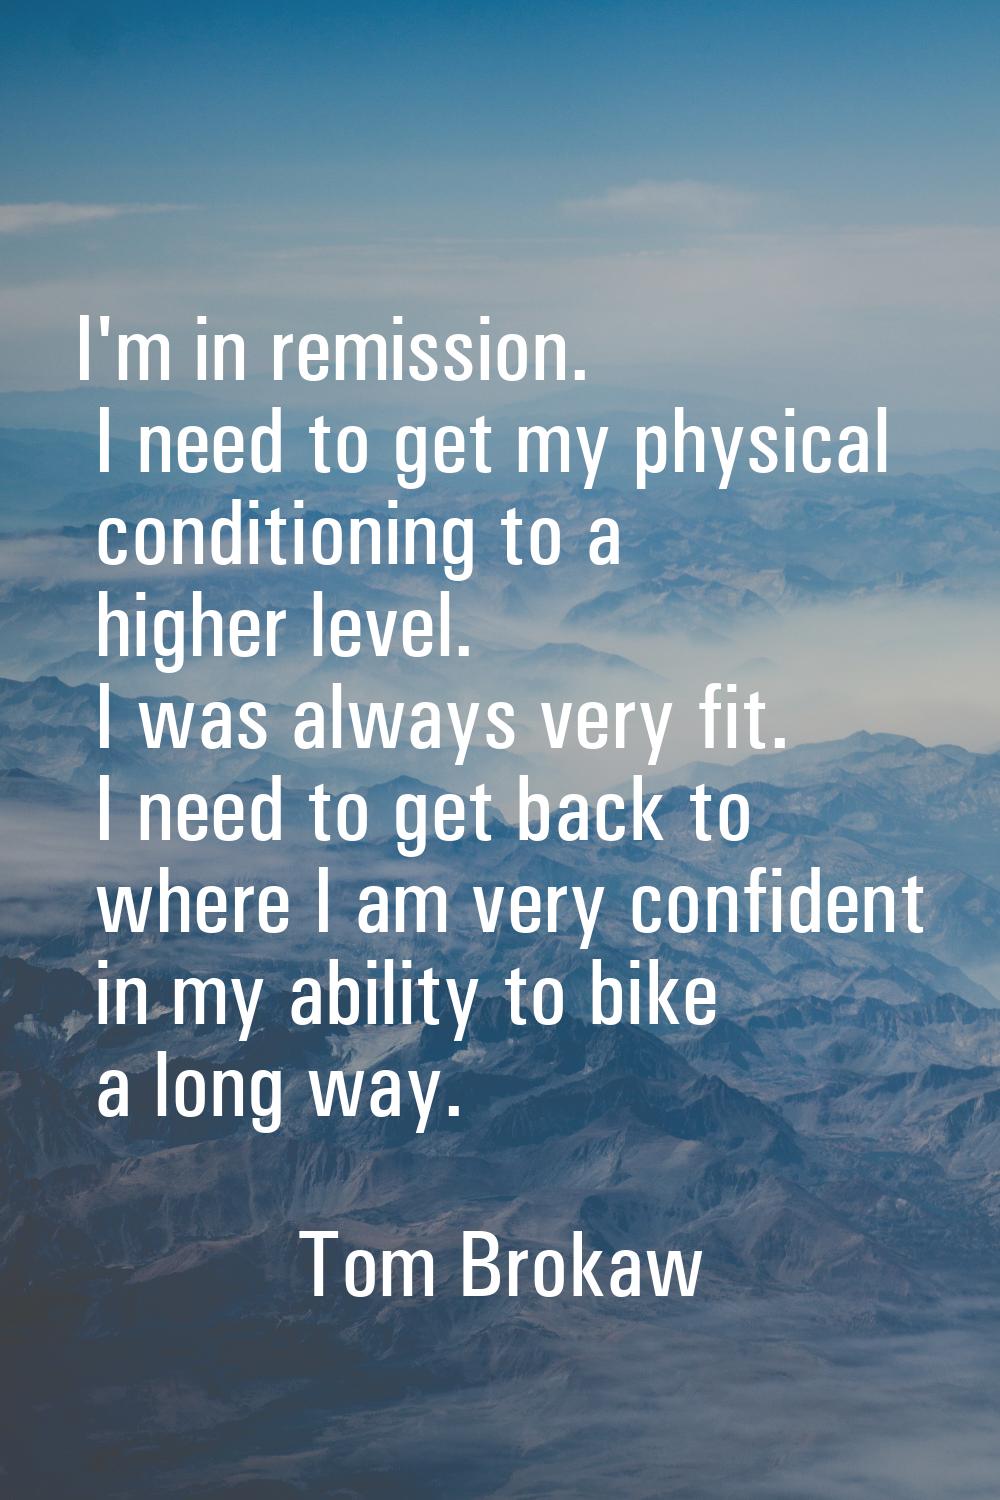 I'm in remission. I need to get my physical conditioning to a higher level. I was always very fit. 